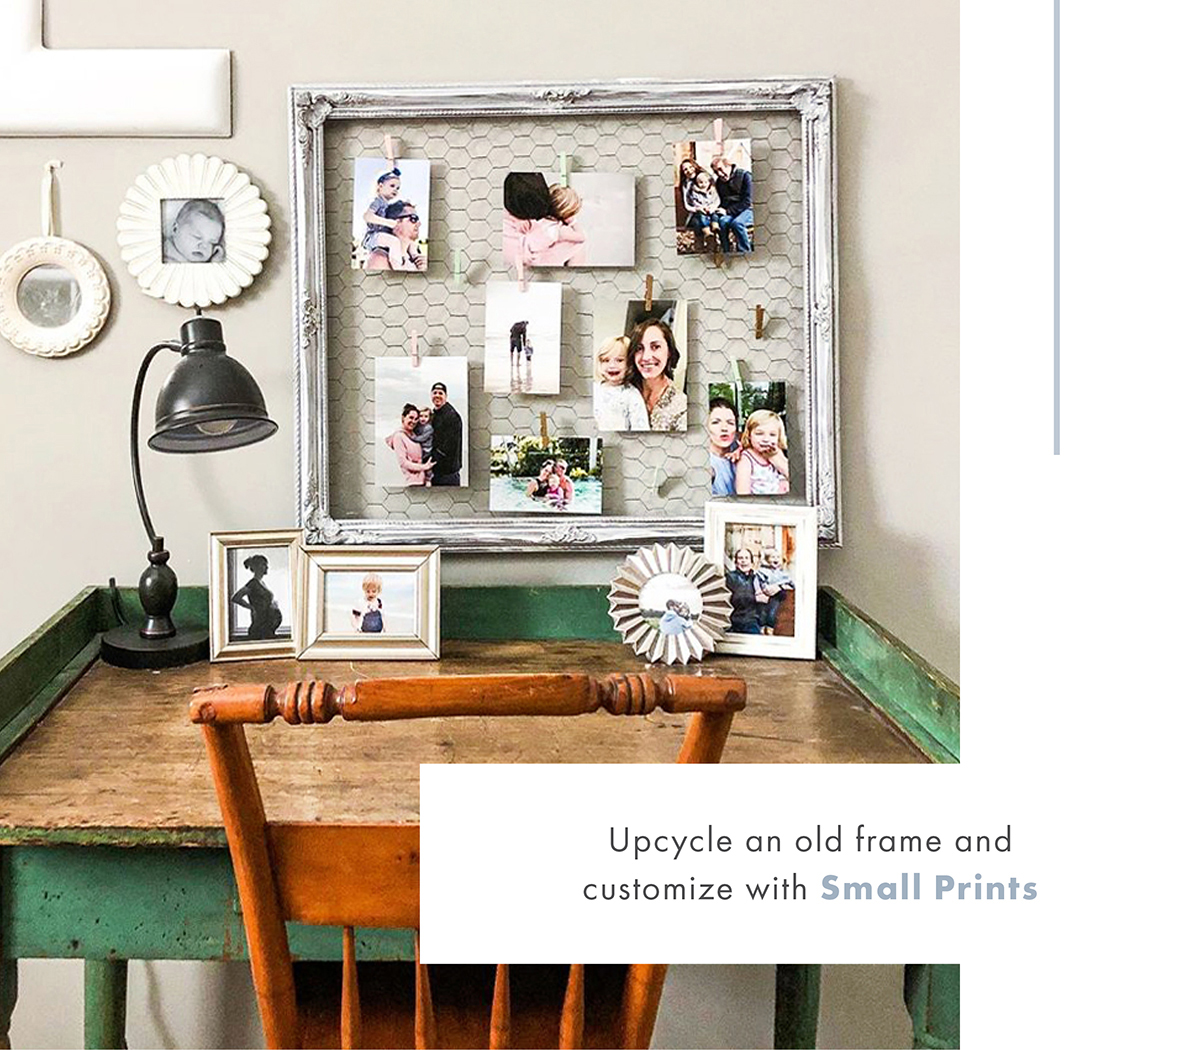 Upcycle an old frame and customize with Small Prints